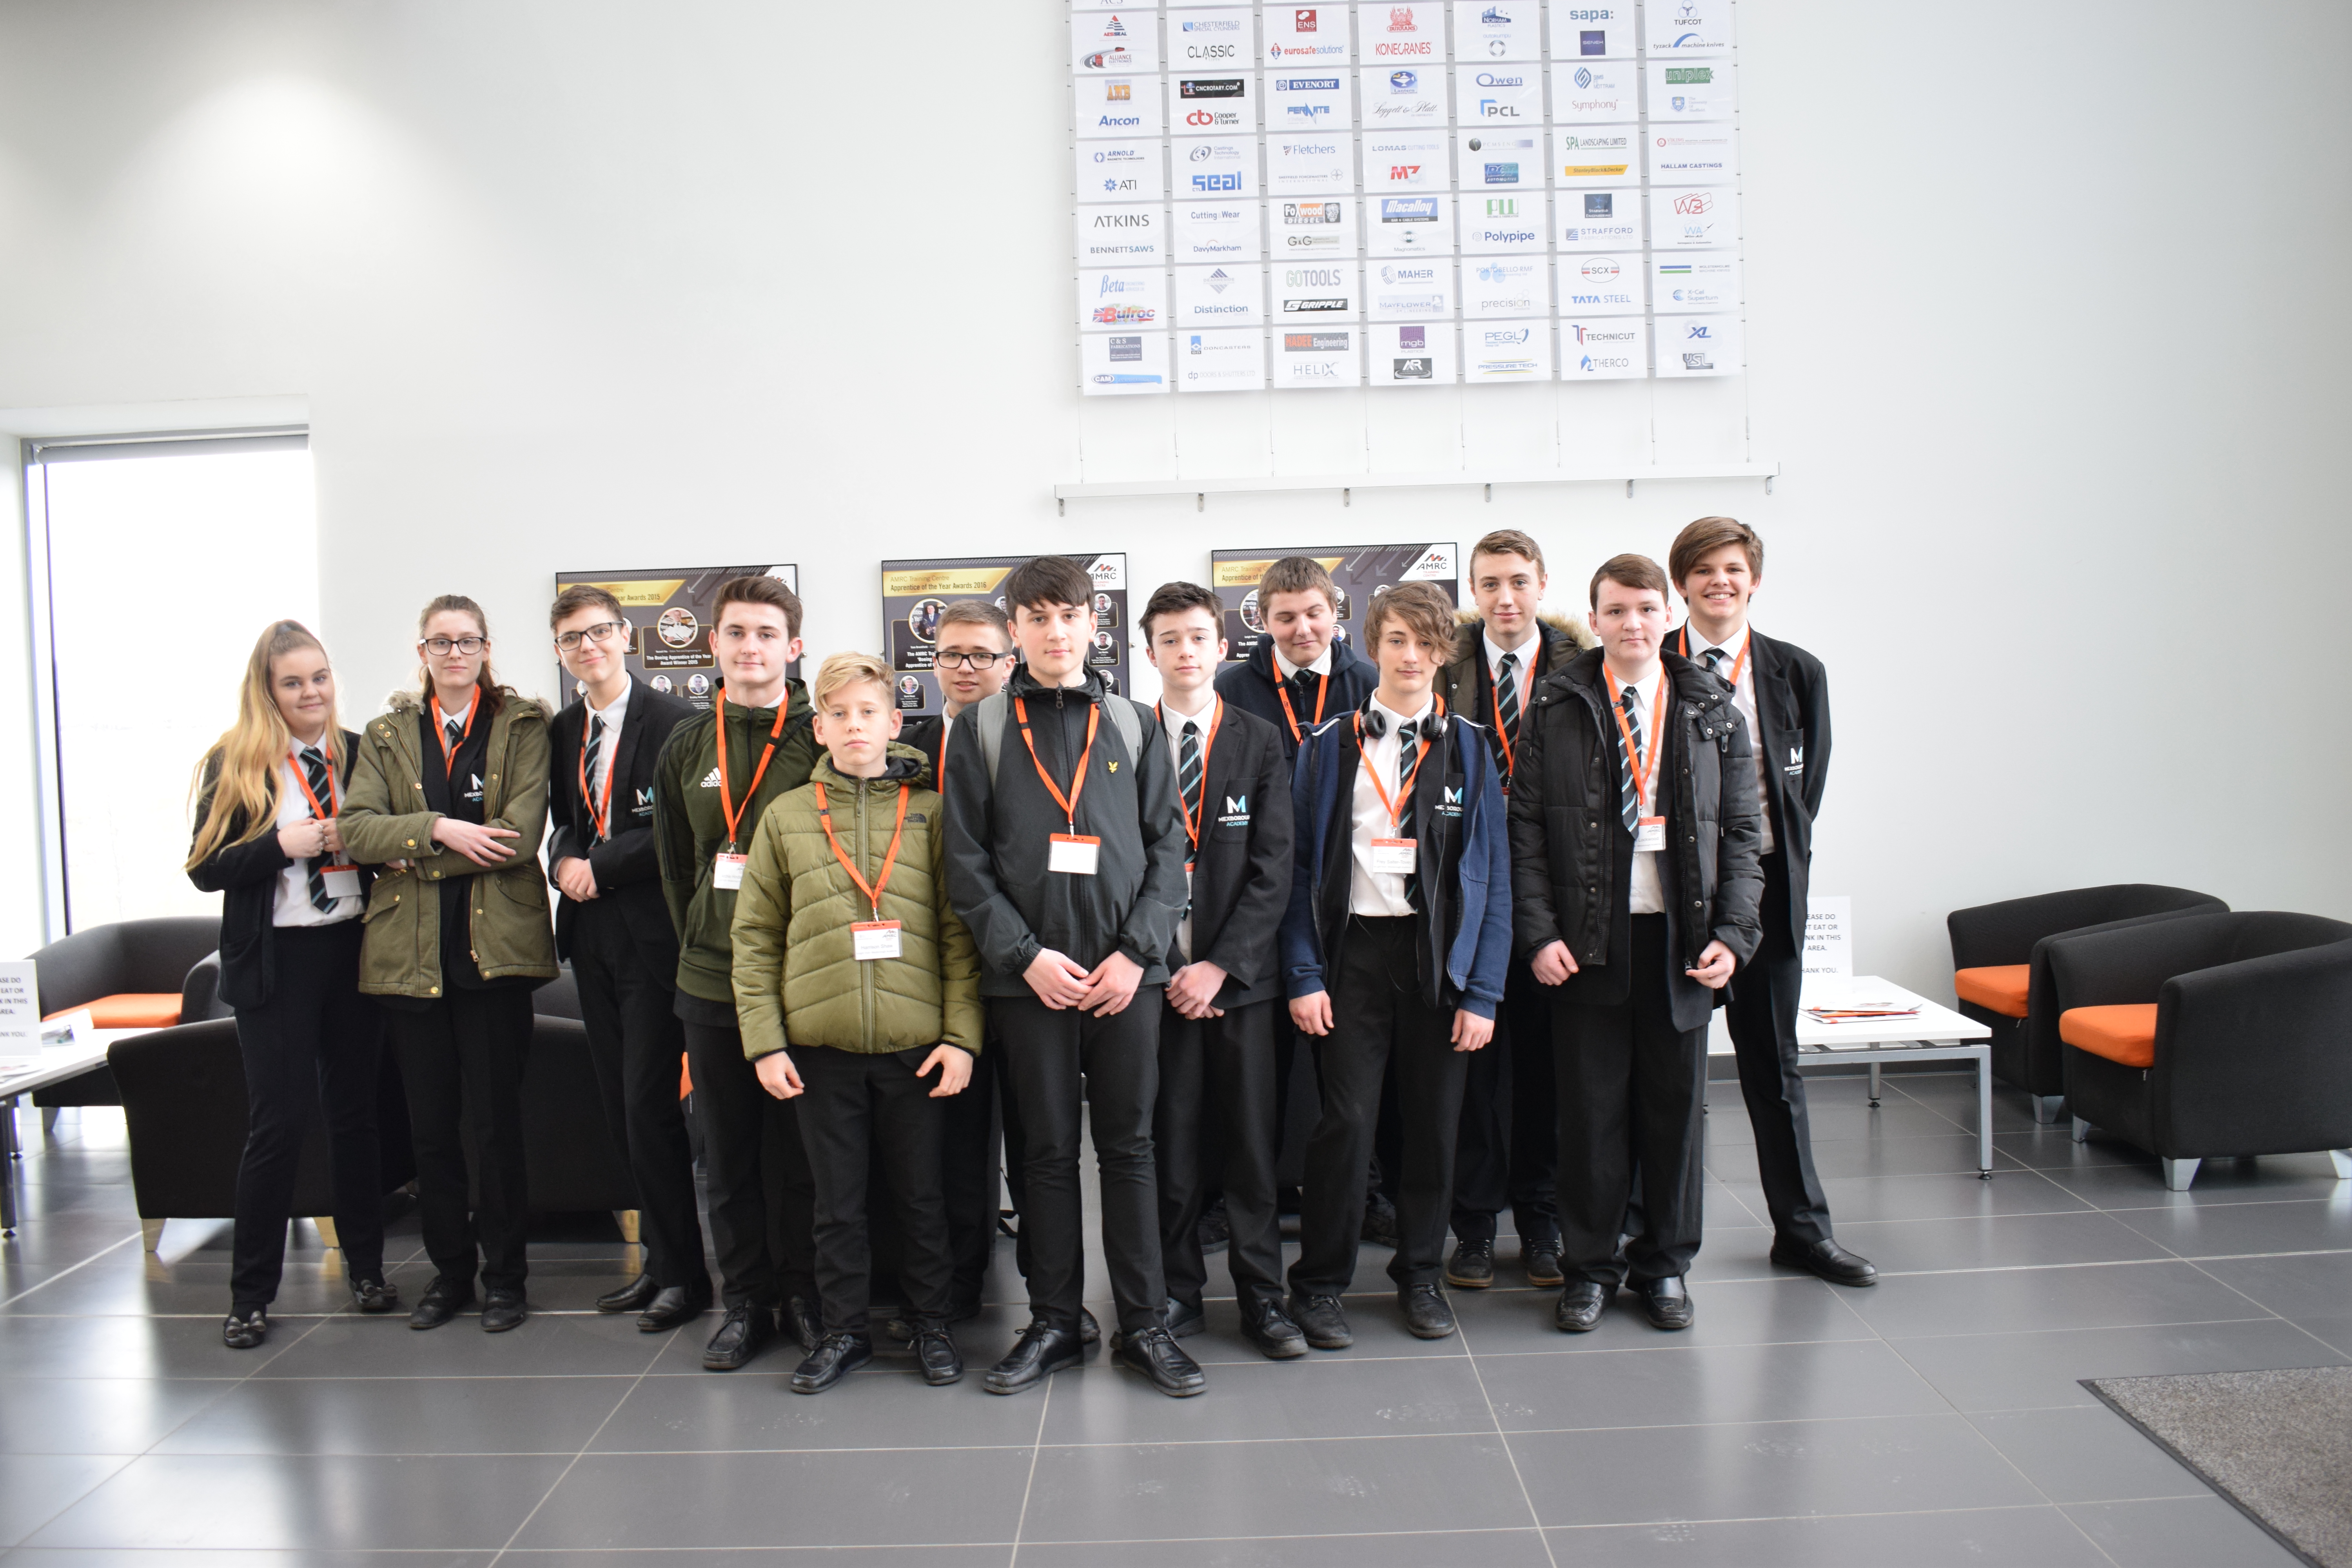 Mexborough Academy Students Explore Their Opportunities At The AMRC